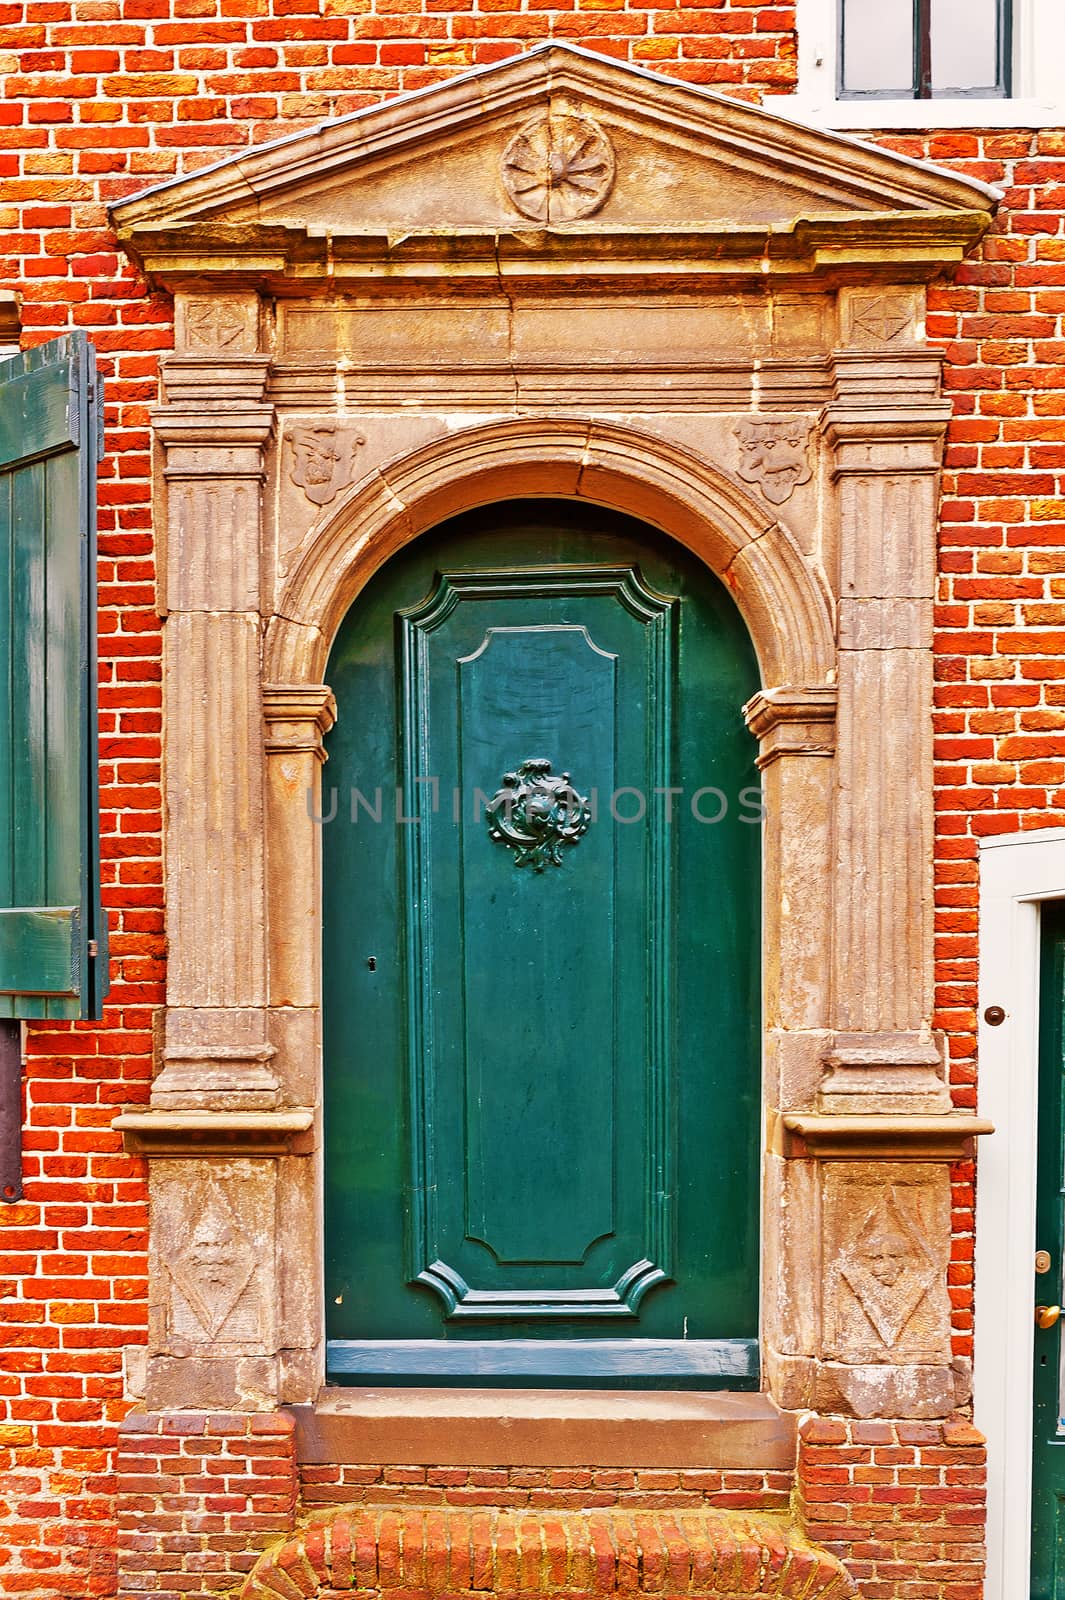 Green Lacquered Door in the Dutch City